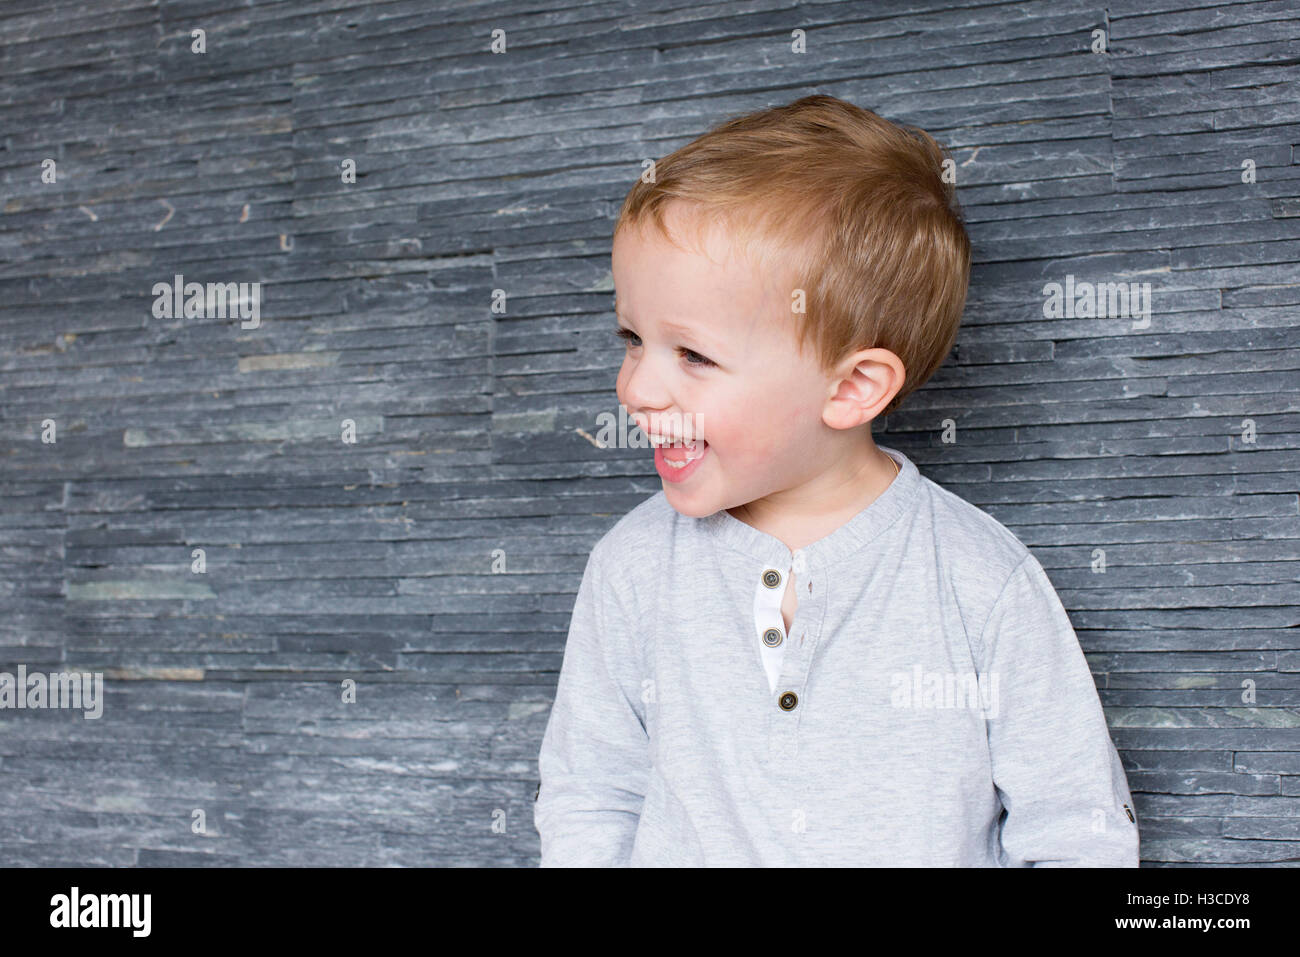 Little boy laughing Stock Photo